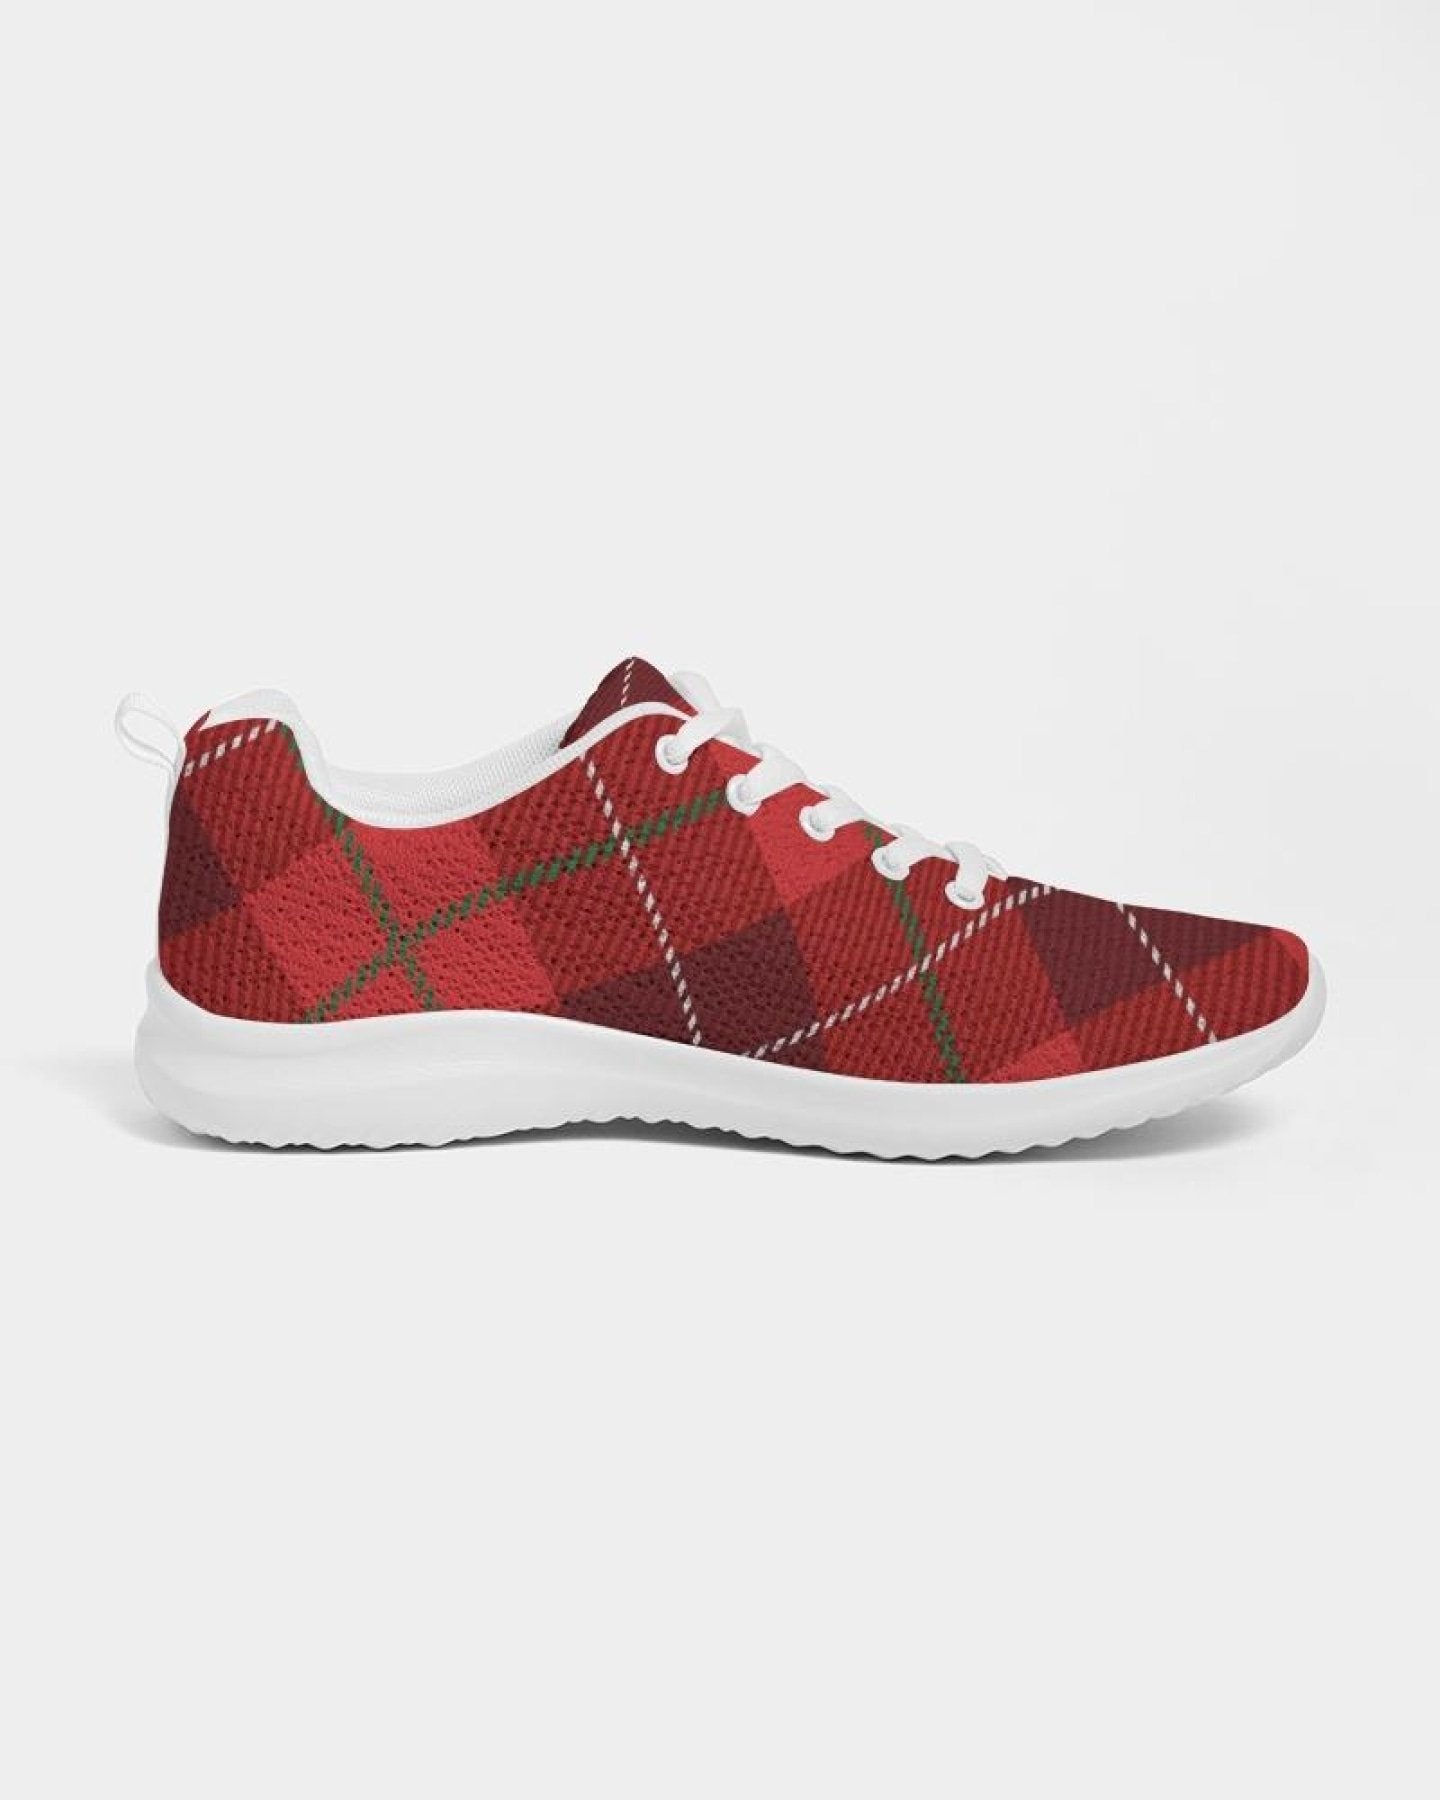 Uniquely You Womens Sneakers - Red Plaid Canvas Sports Shoes / Running - KRE Prime Deals